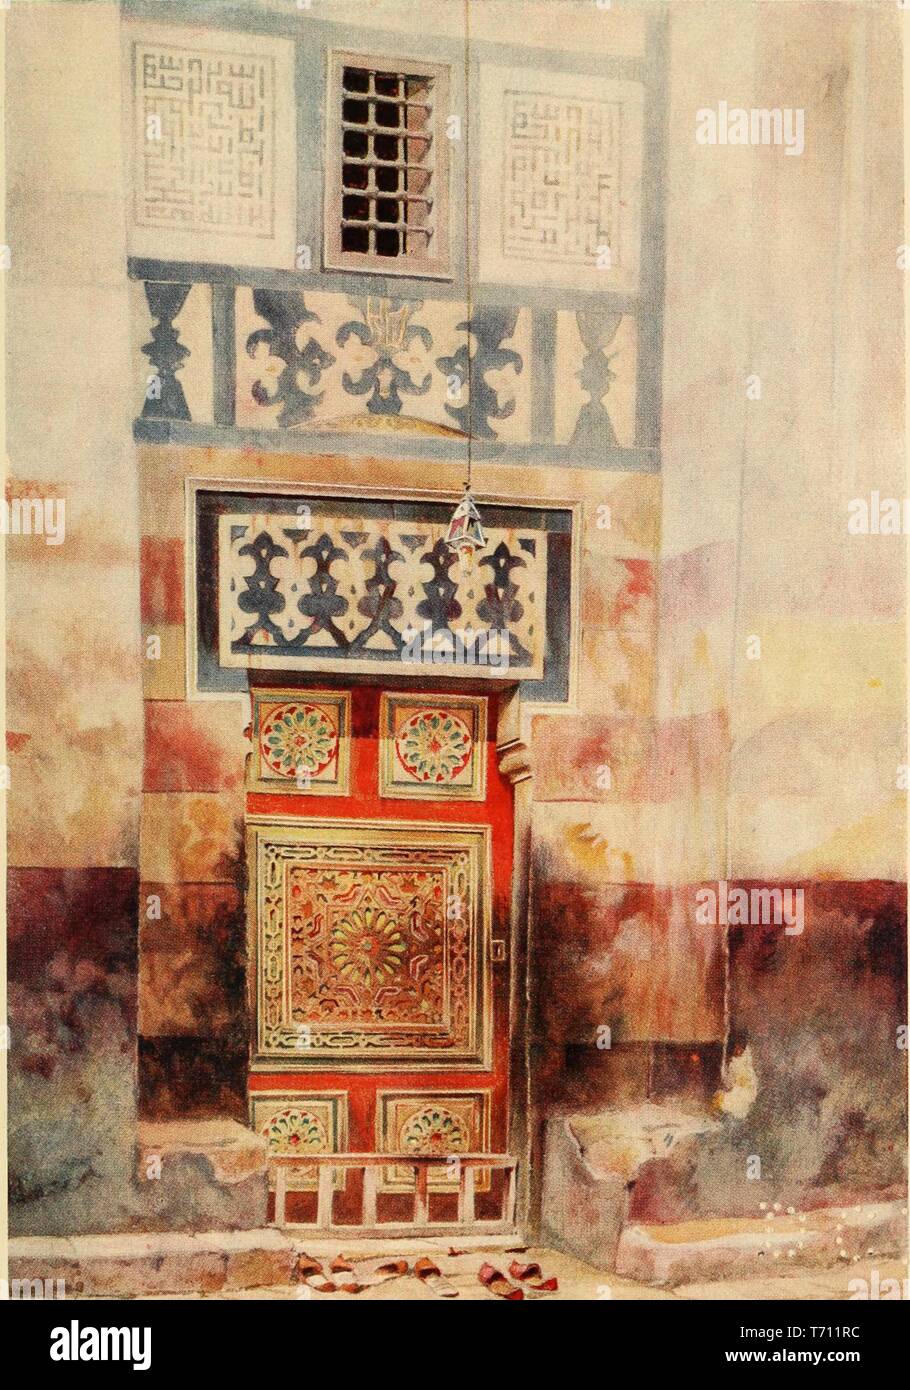 Watercolor painting 'Door of the Mosque, Cairo' by Walter Spencer Stanhope Tyrwhitt, from the book 'Cairo, Jerusalem, and Damascus' by David Samuel, 1912. Courtesy Internet Archive. () Stock Photo